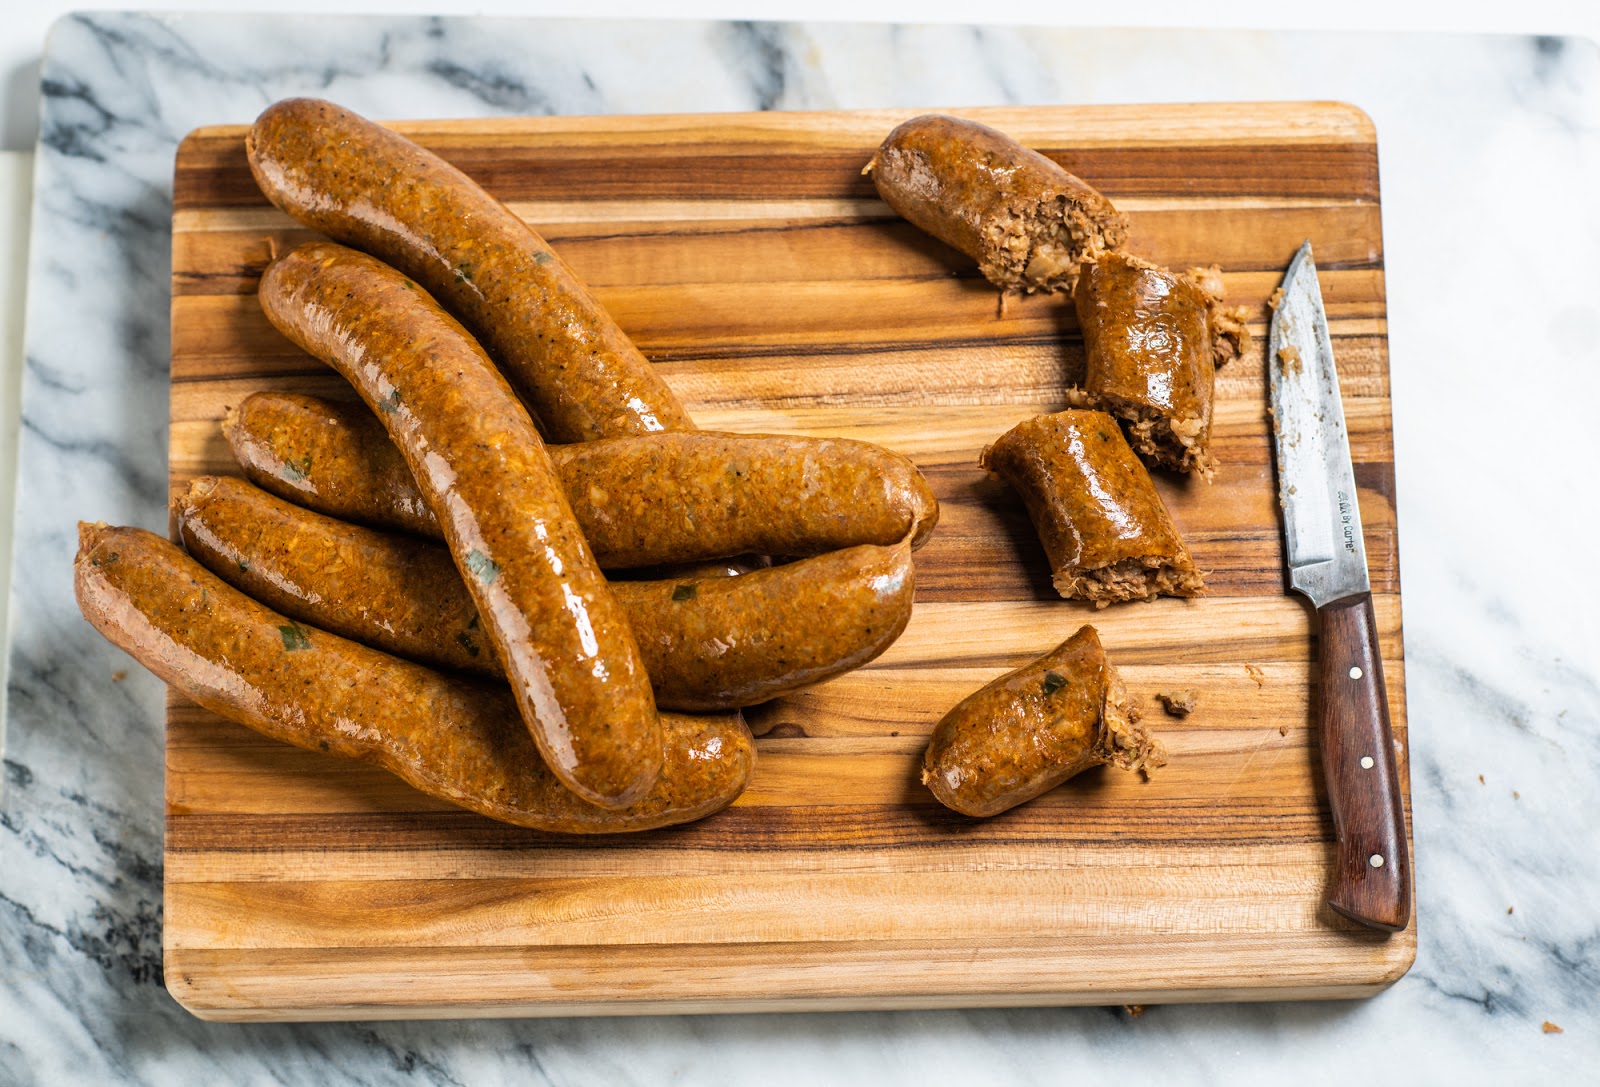 5 Of The Best Stops For Boudin In Acadiana